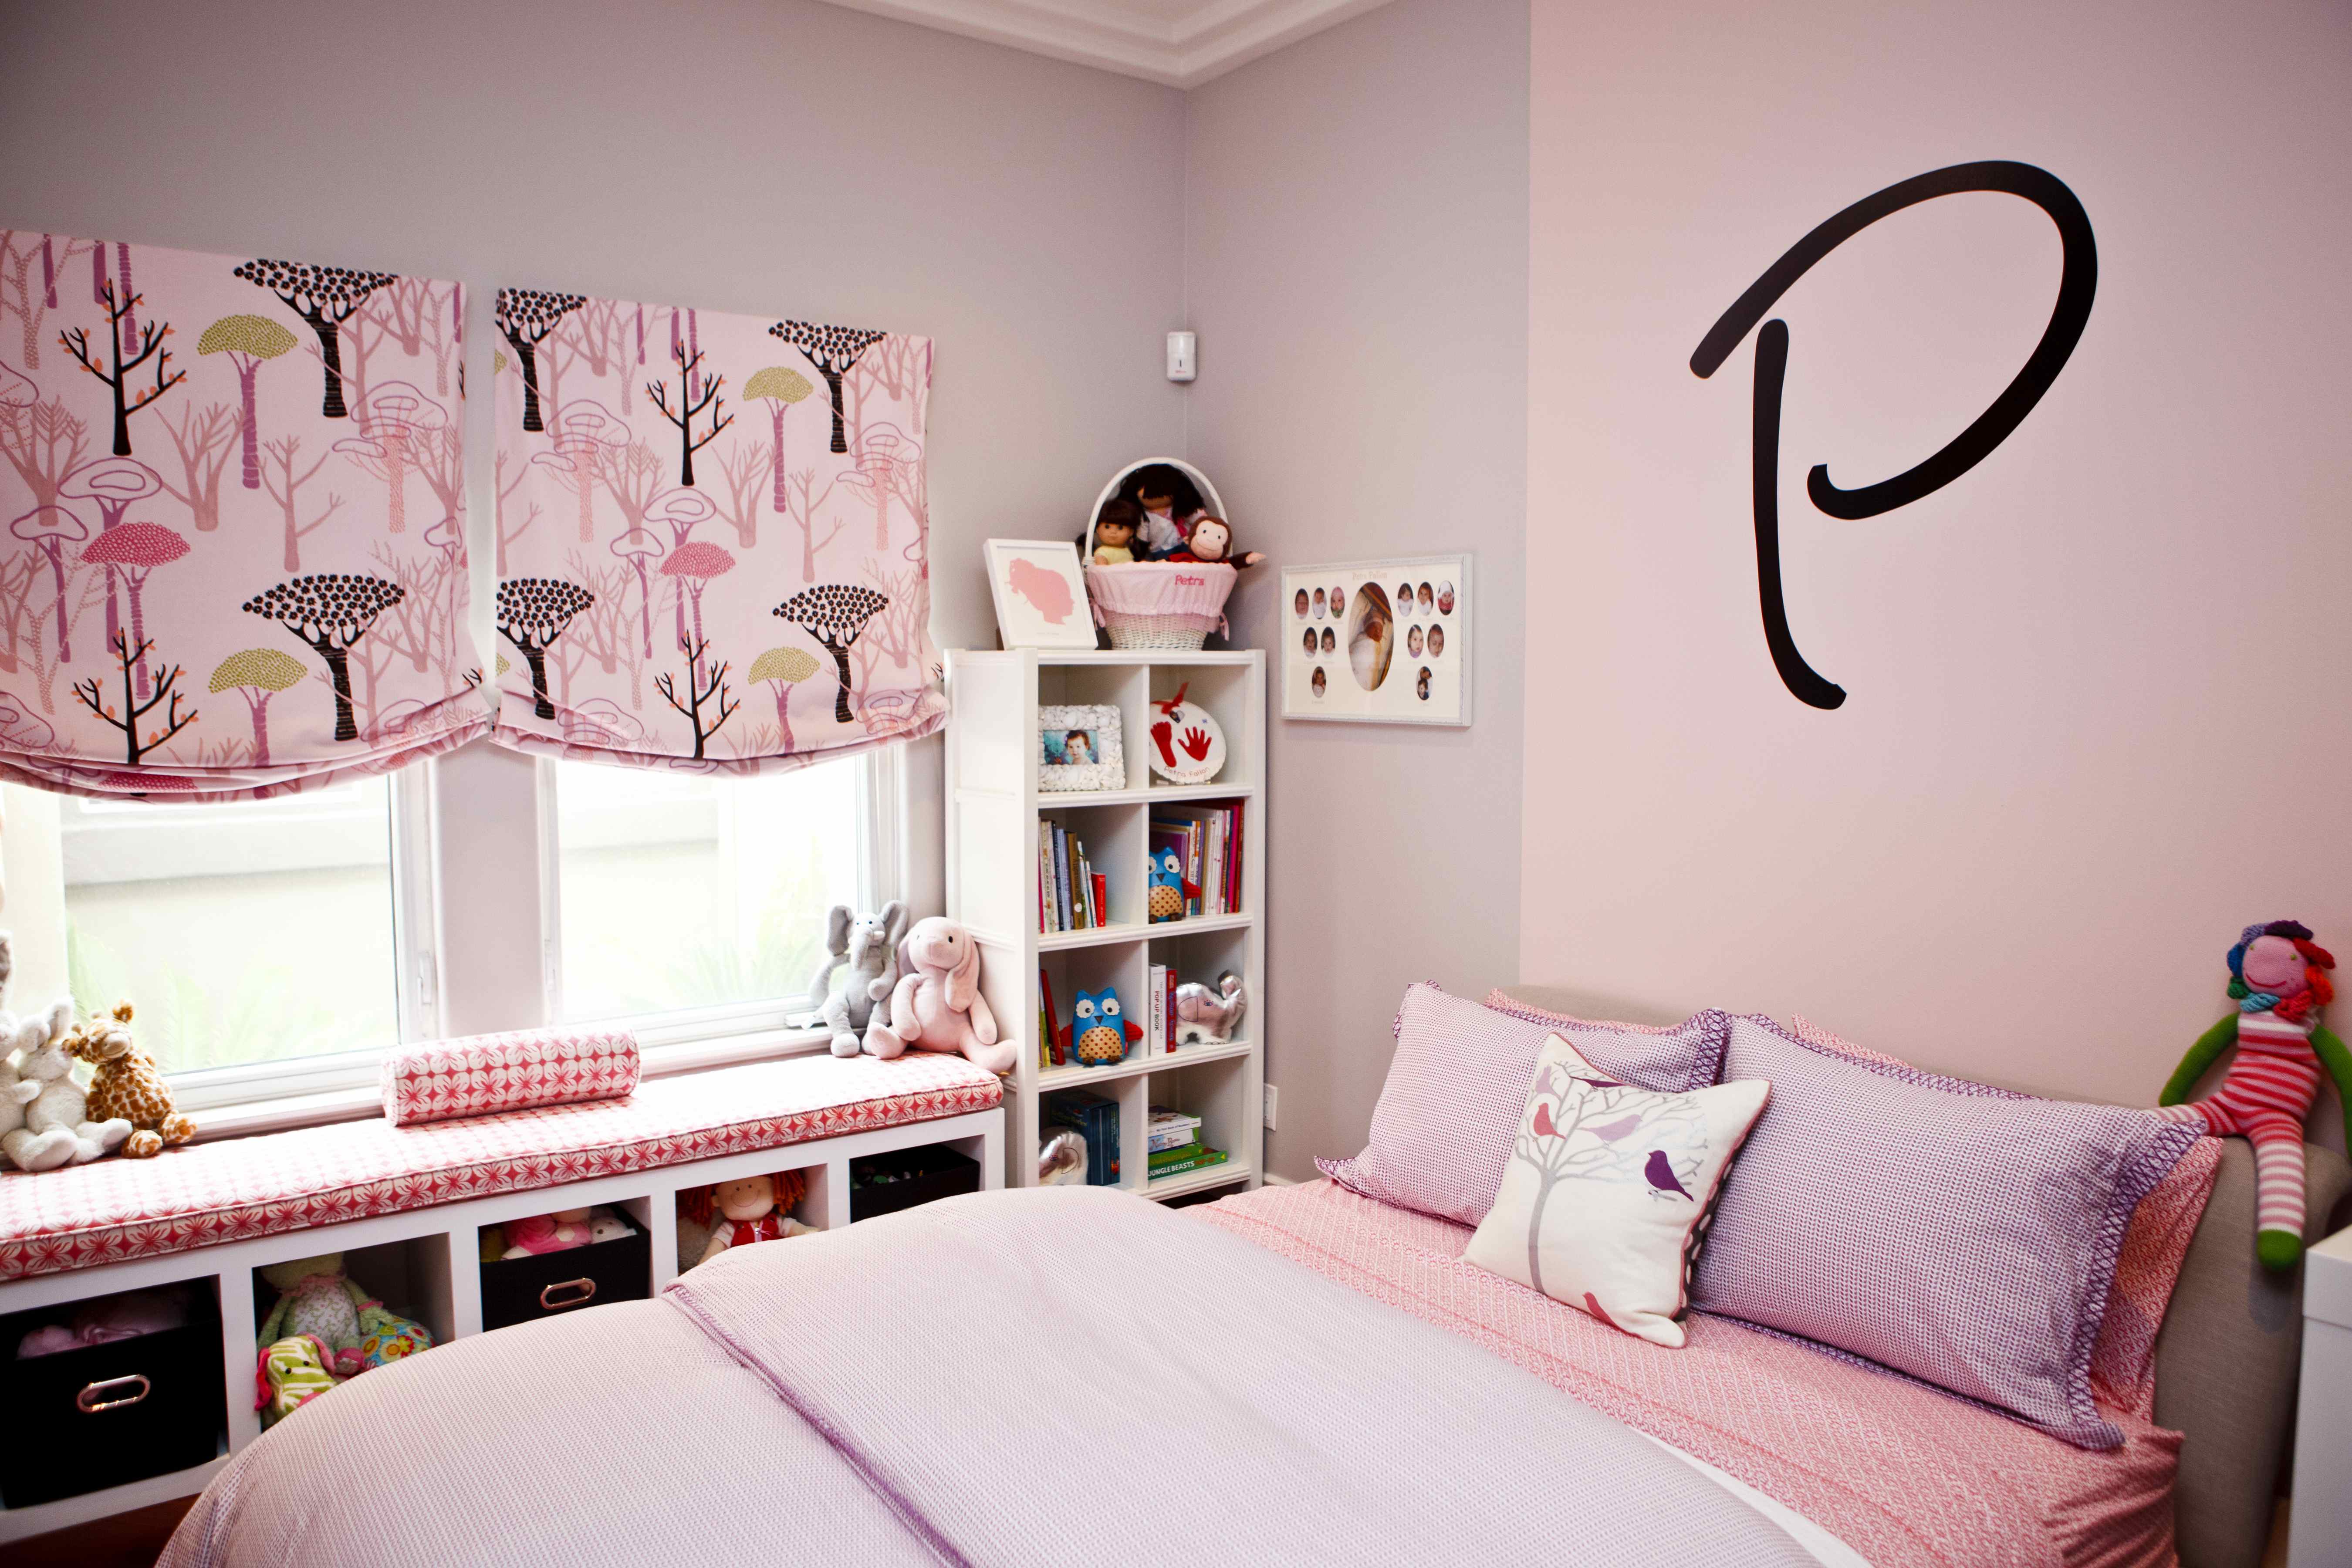 Bedroom Decorating Ideas For Toddler 3 Year Old